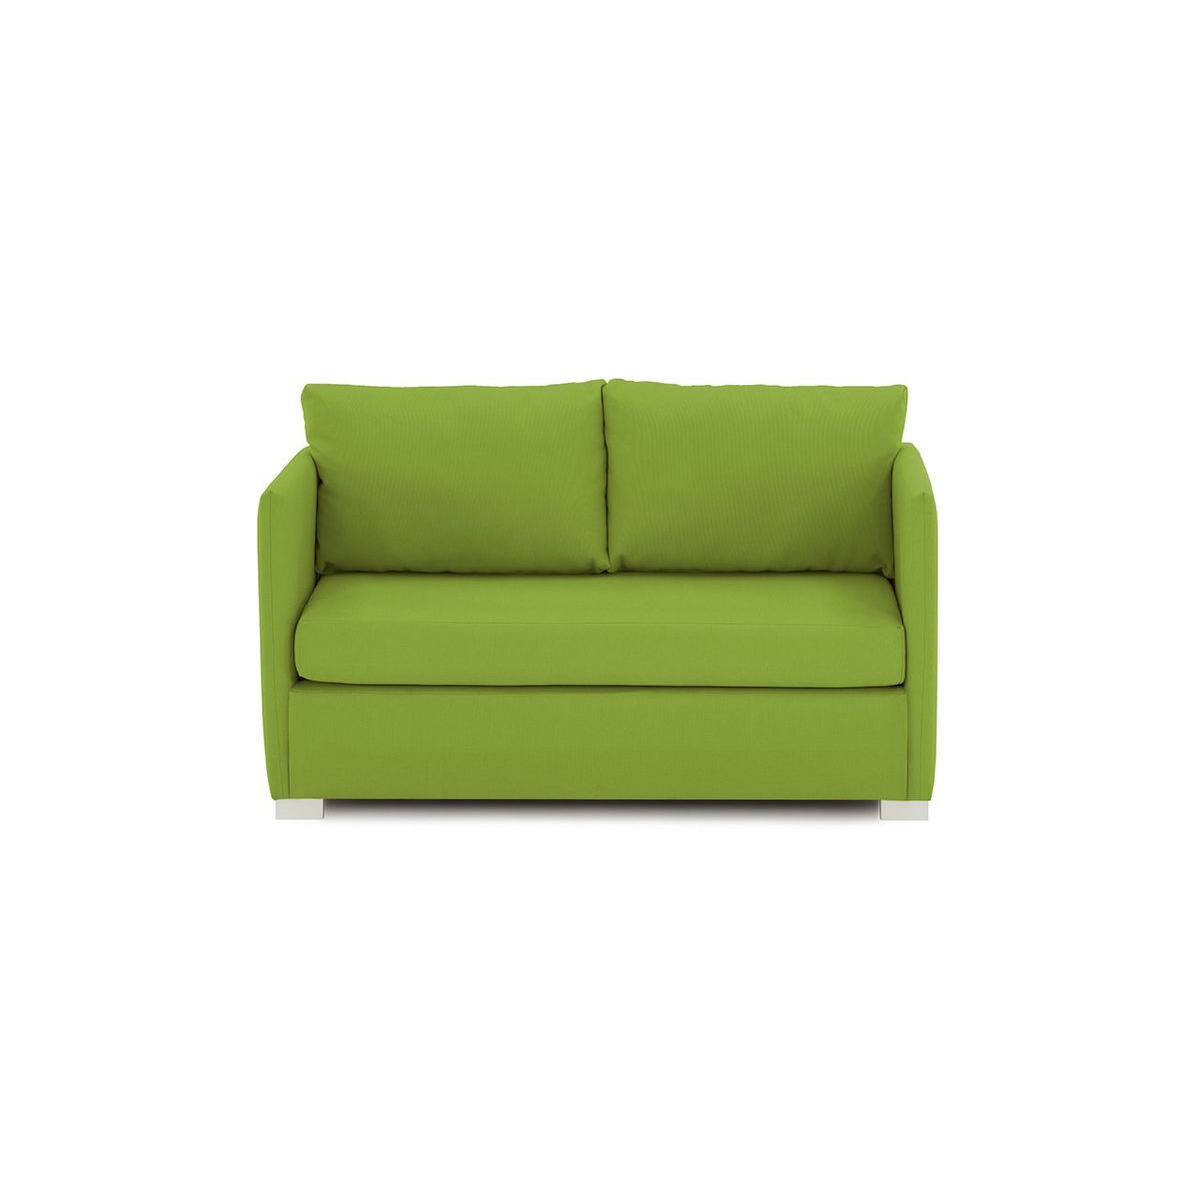 Tulip Fold Out Sofa Bed, lime - image 1